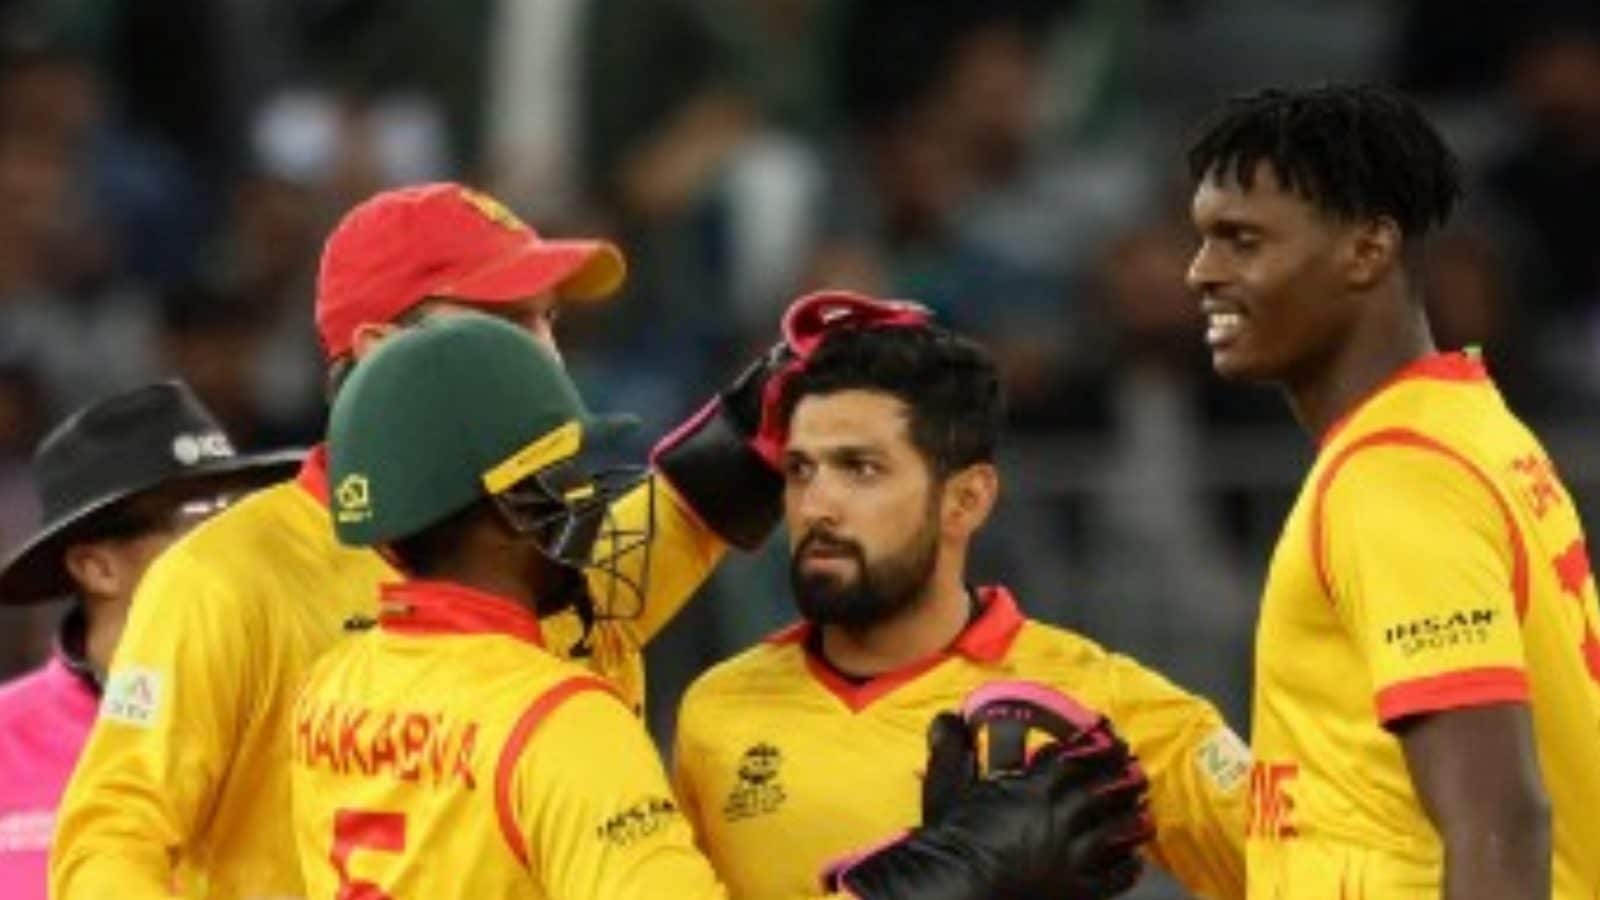 zim-vs-ned-t20-world-cup-dream11-team-prediction-check-captain-vice-captain-and-probable-xis-for-zimbabwe-vs-netherlands